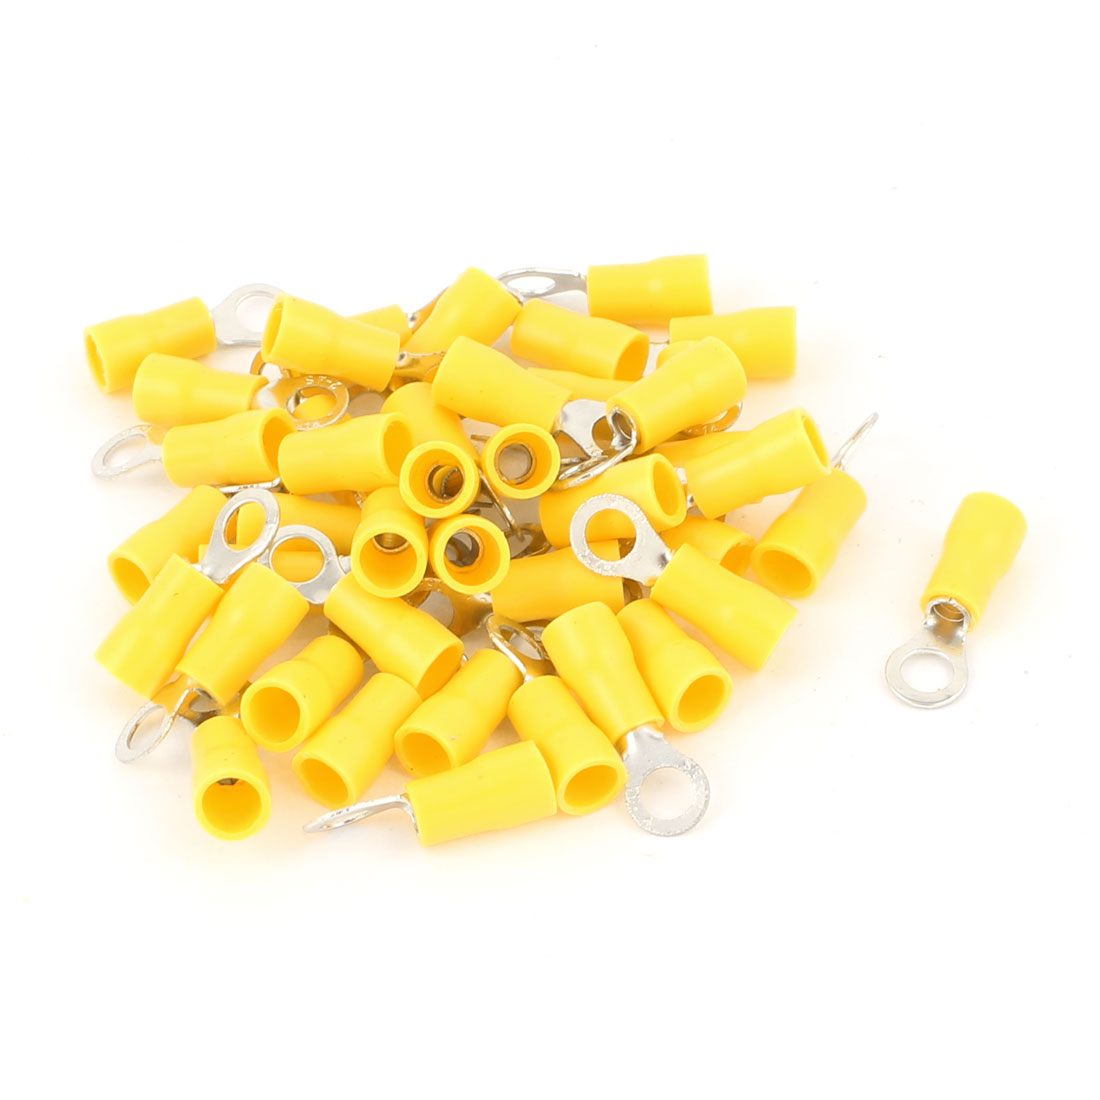 Unique Bargains 40 Pcs Insulated Ring Crimp Electric Cable Terminals Connector AWG 16-14 Yellow